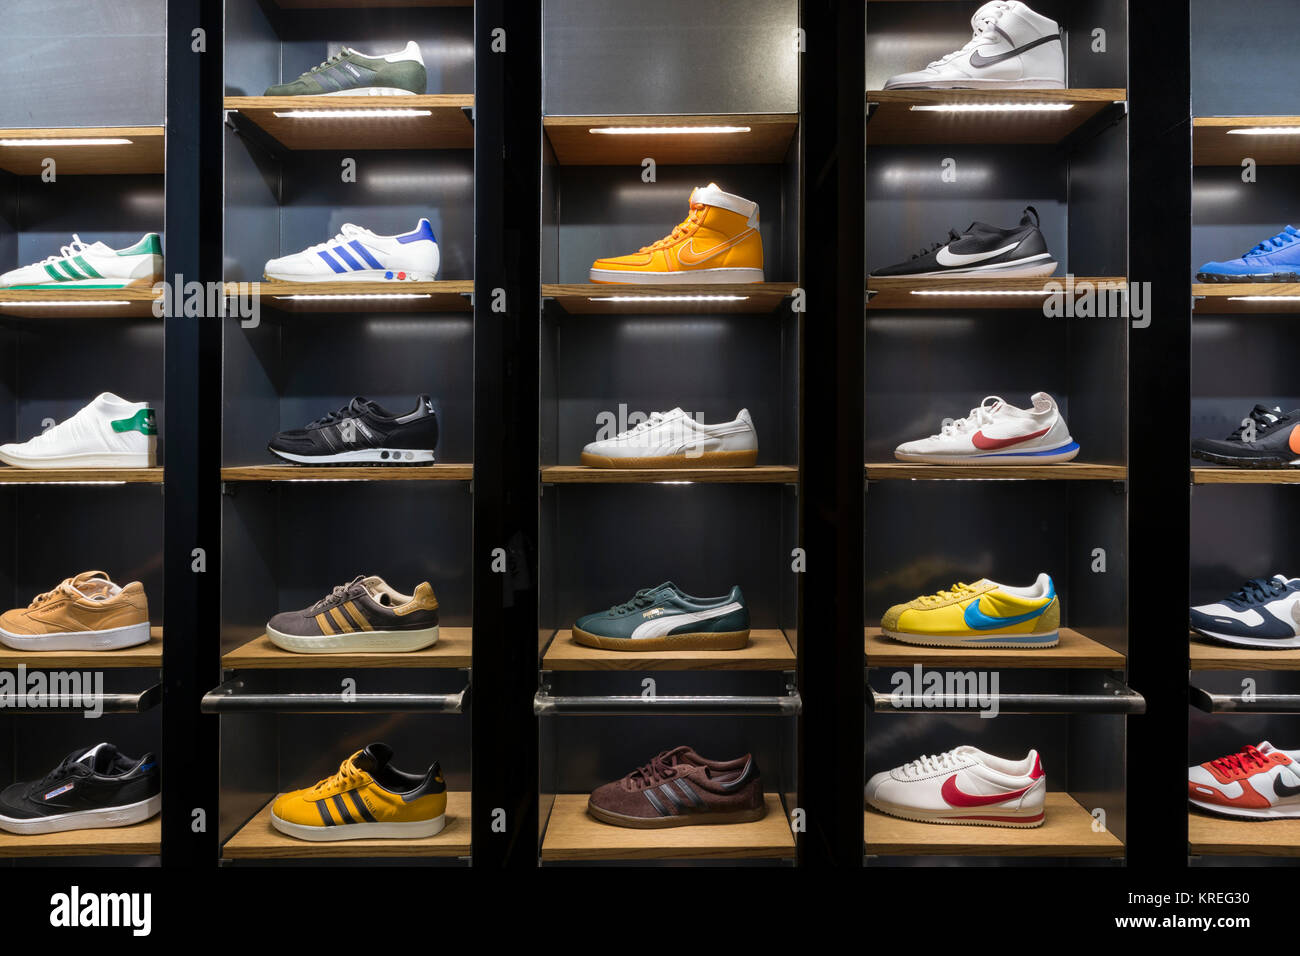 Sneakers of a store, Milano, Italy Stock Photo -